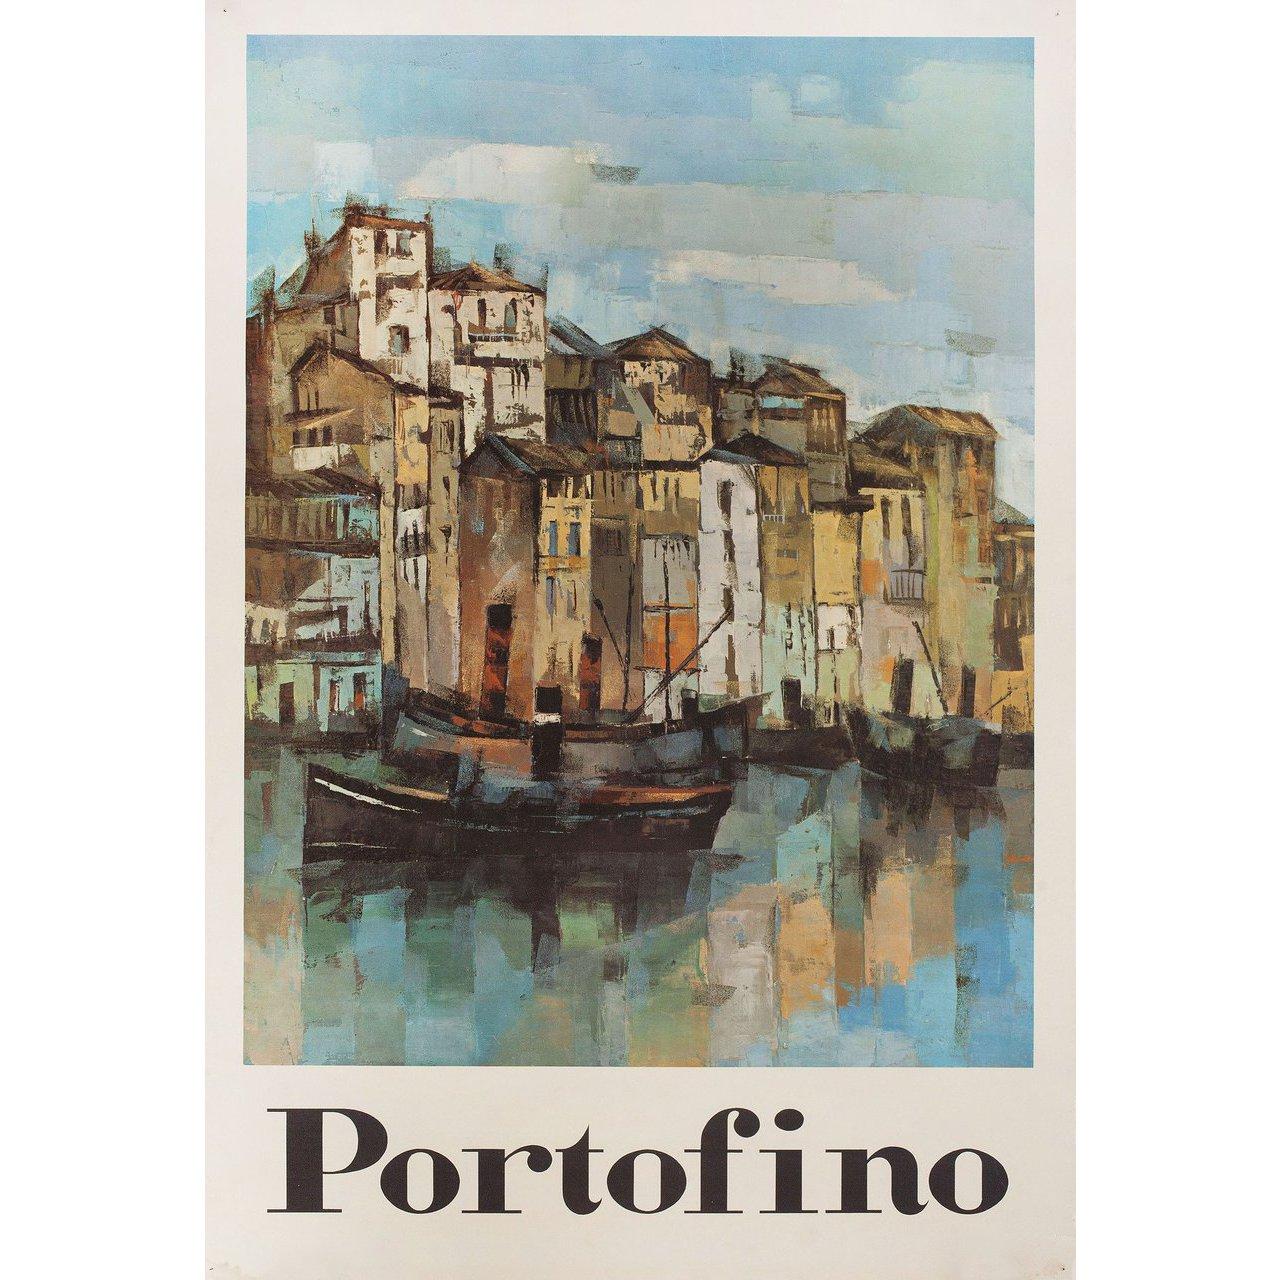 Original 1960s Italian poster by Clement Van Vlaardingen for “Portofino” (1960s). Very good-fine condition, rolled. Please note: the size is stated in inches and the actual size can vary by an inch or more.
   